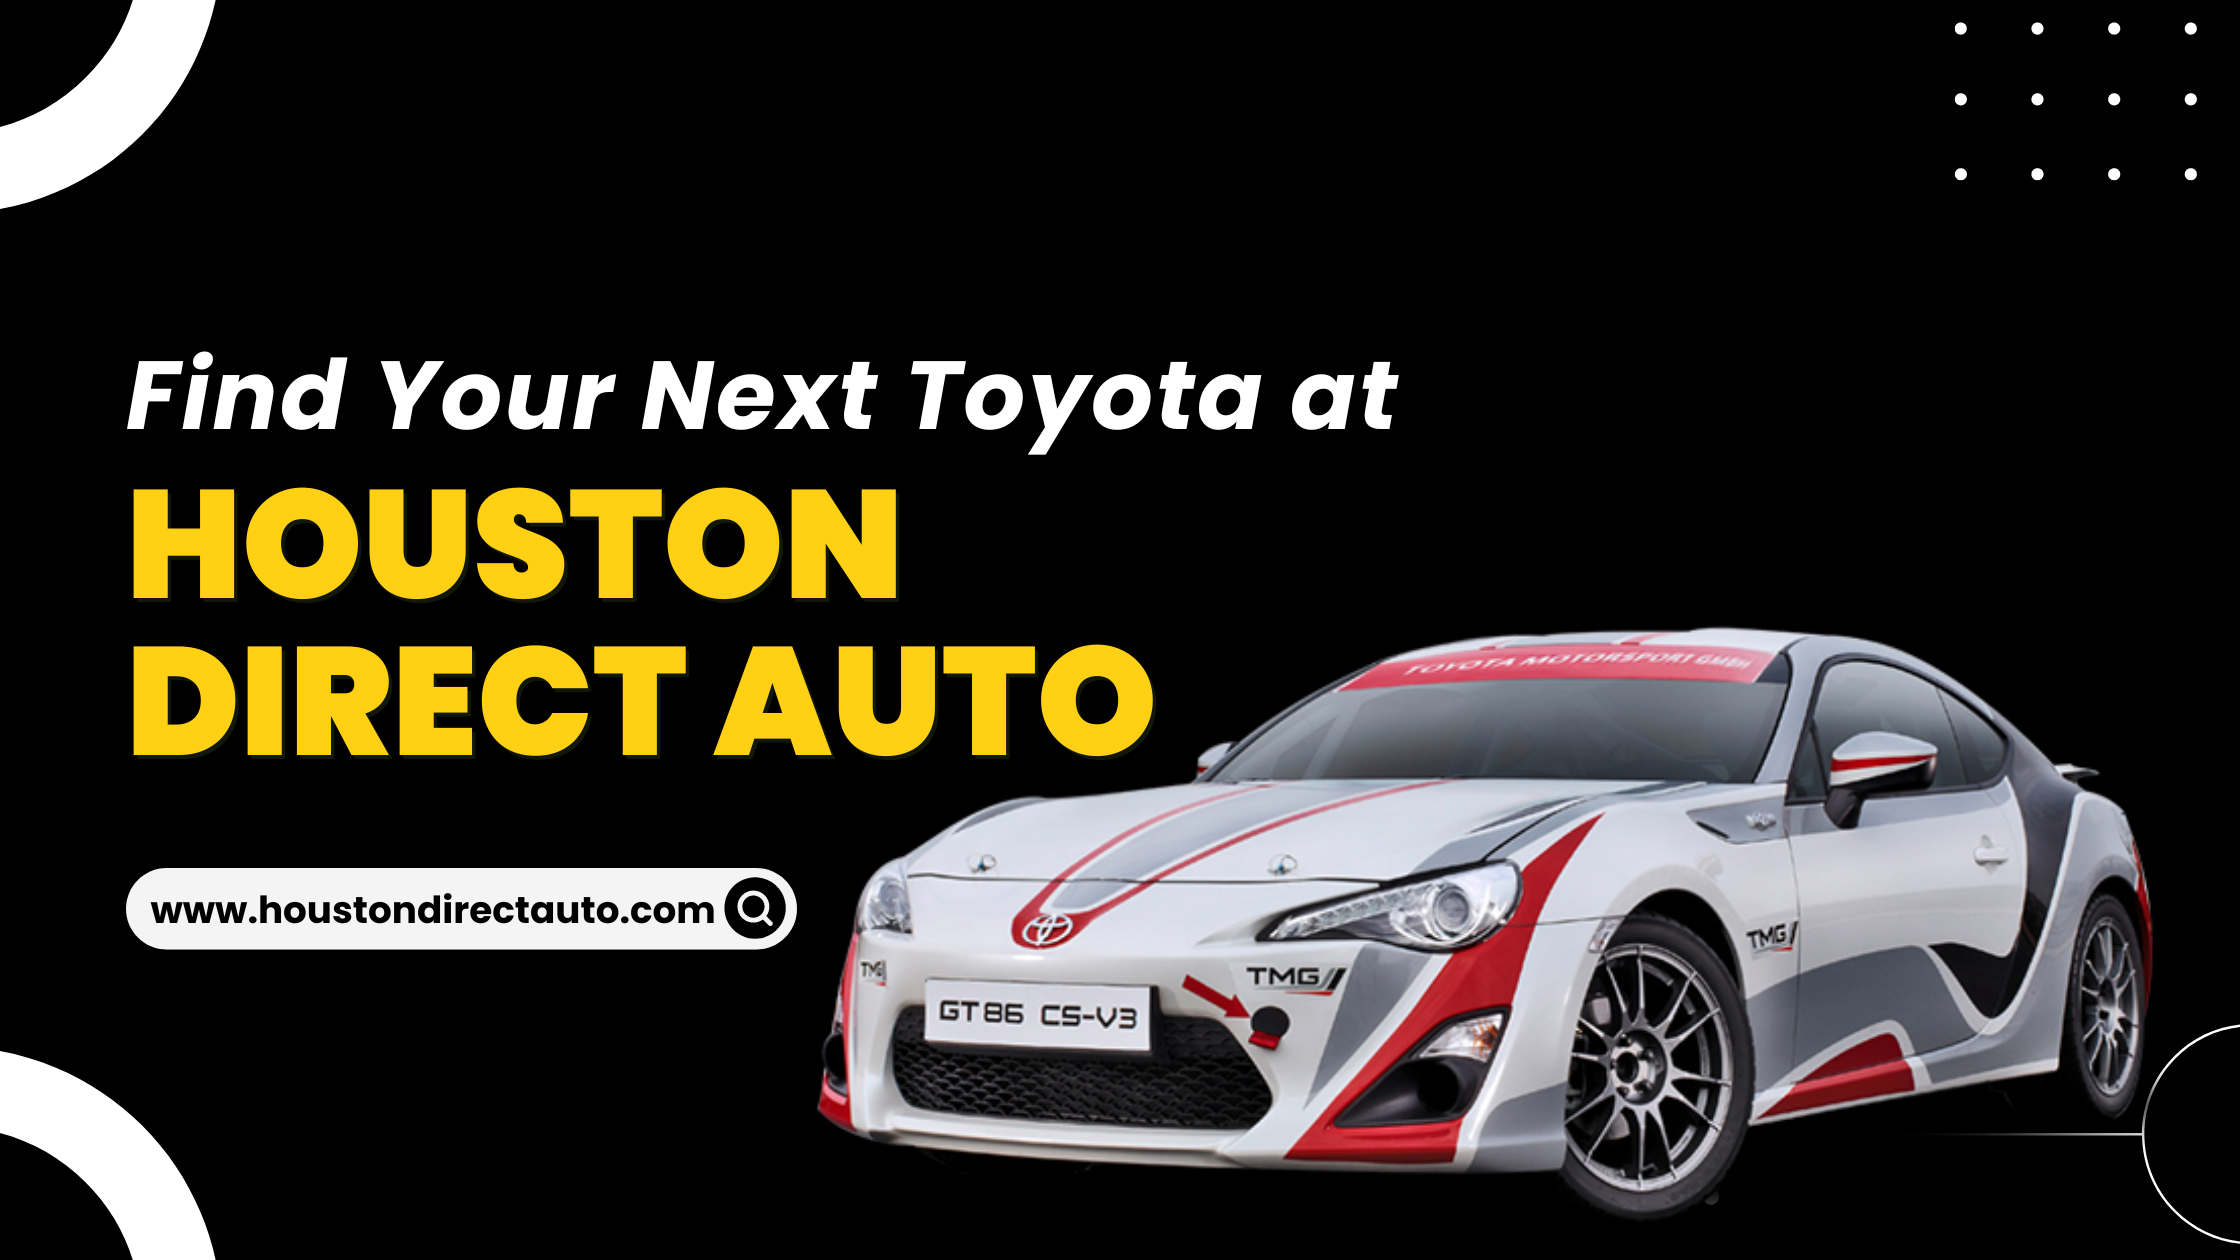 used toyota for sale in houston tx, toyota cars for sale in houston tx, toyota certified used cars in houston tx